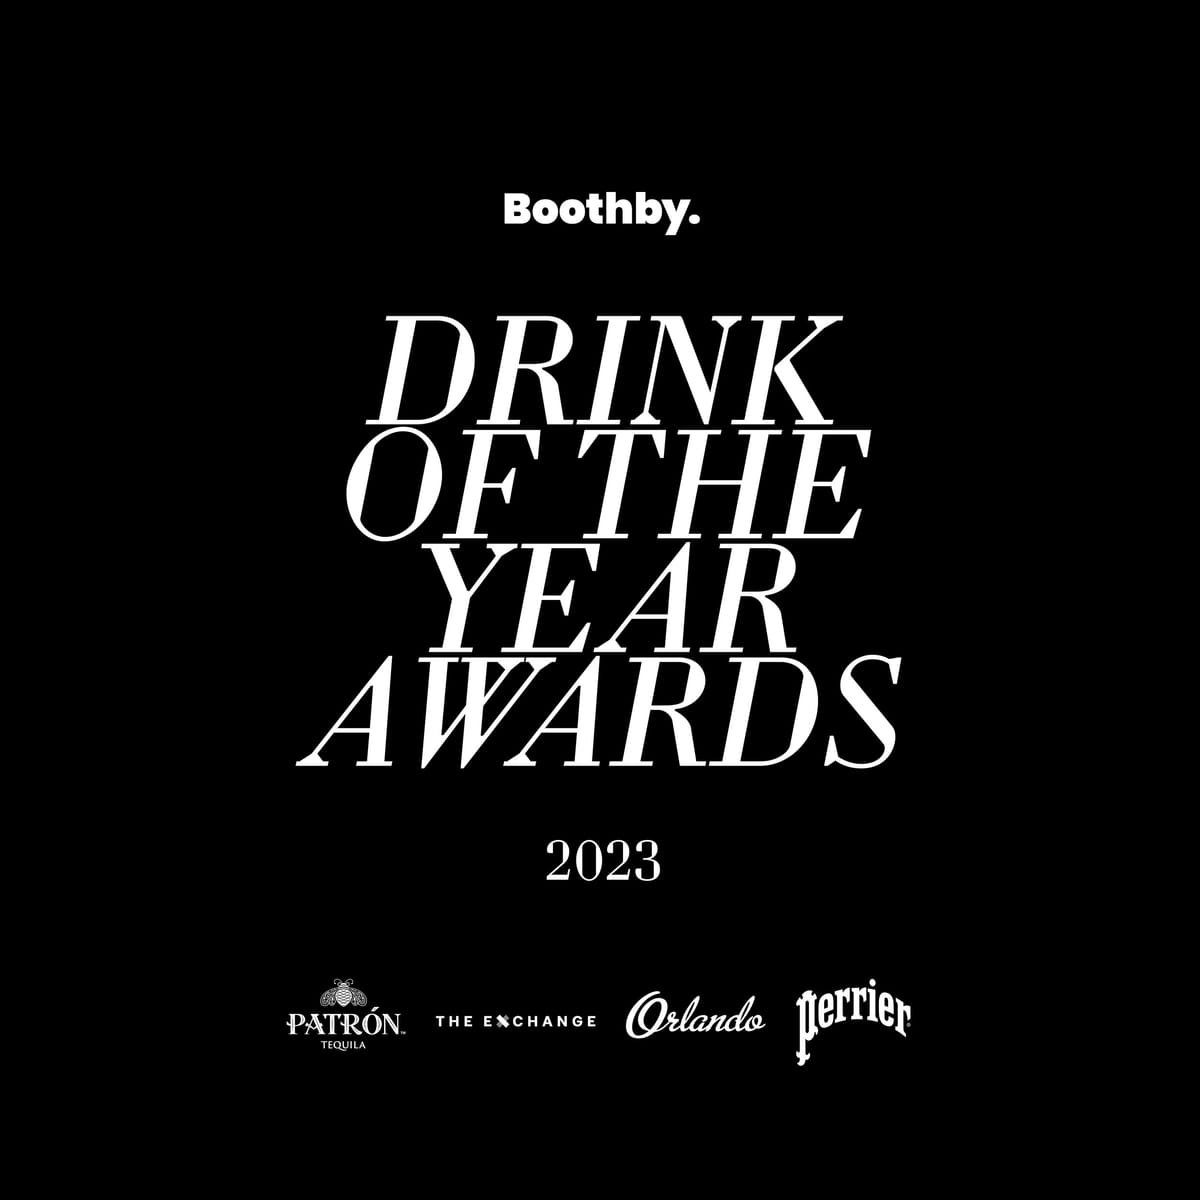 Entries are now open for the second annual Boothby Drink of the Year Awards